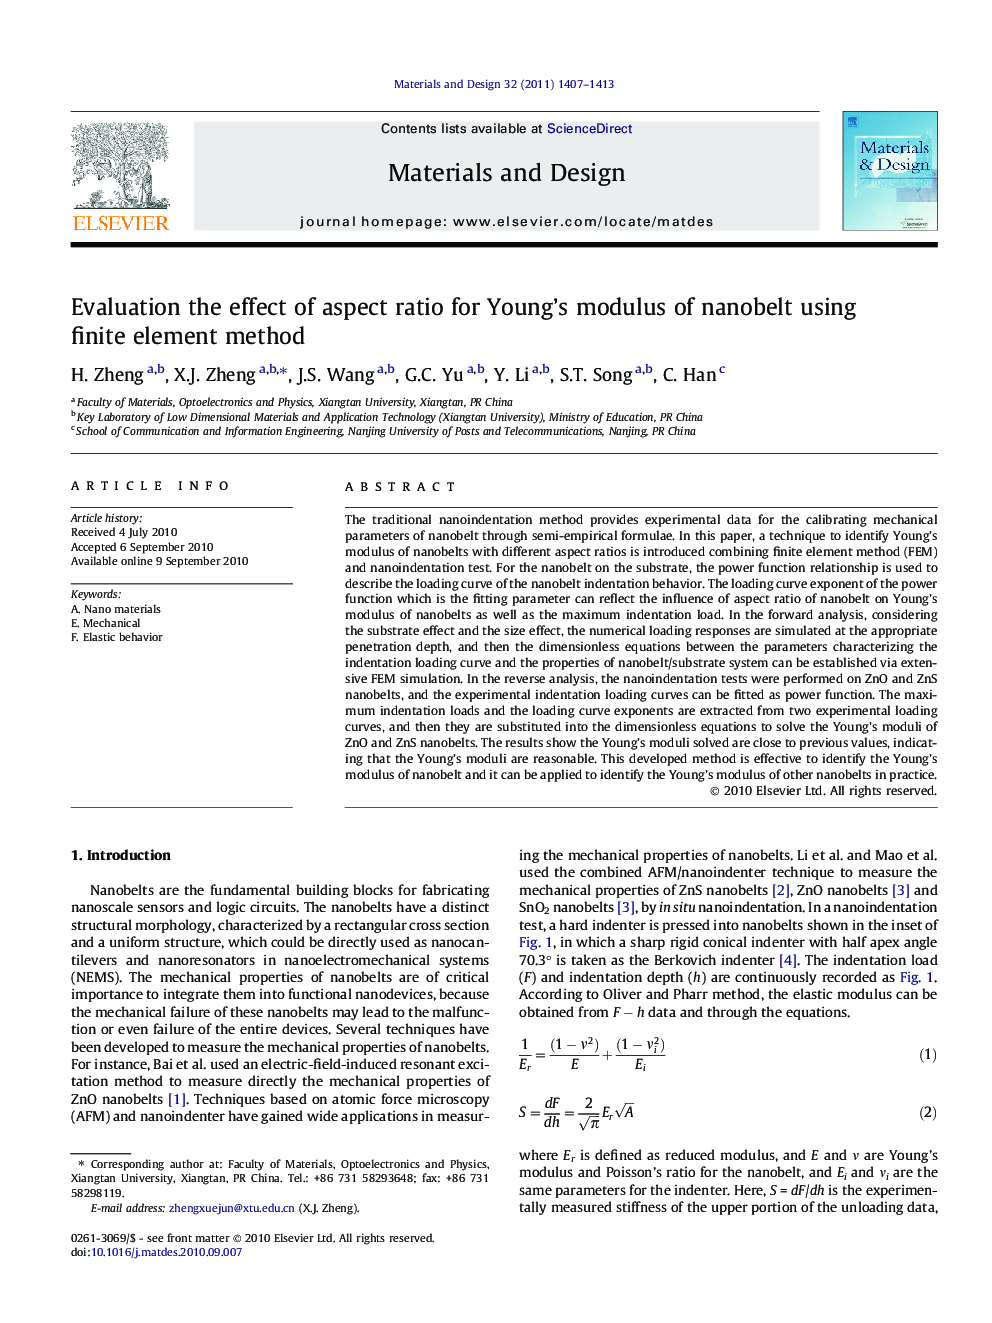 Evaluation the effect of aspect ratio for Young’s modulus of nanobelt using finite element method